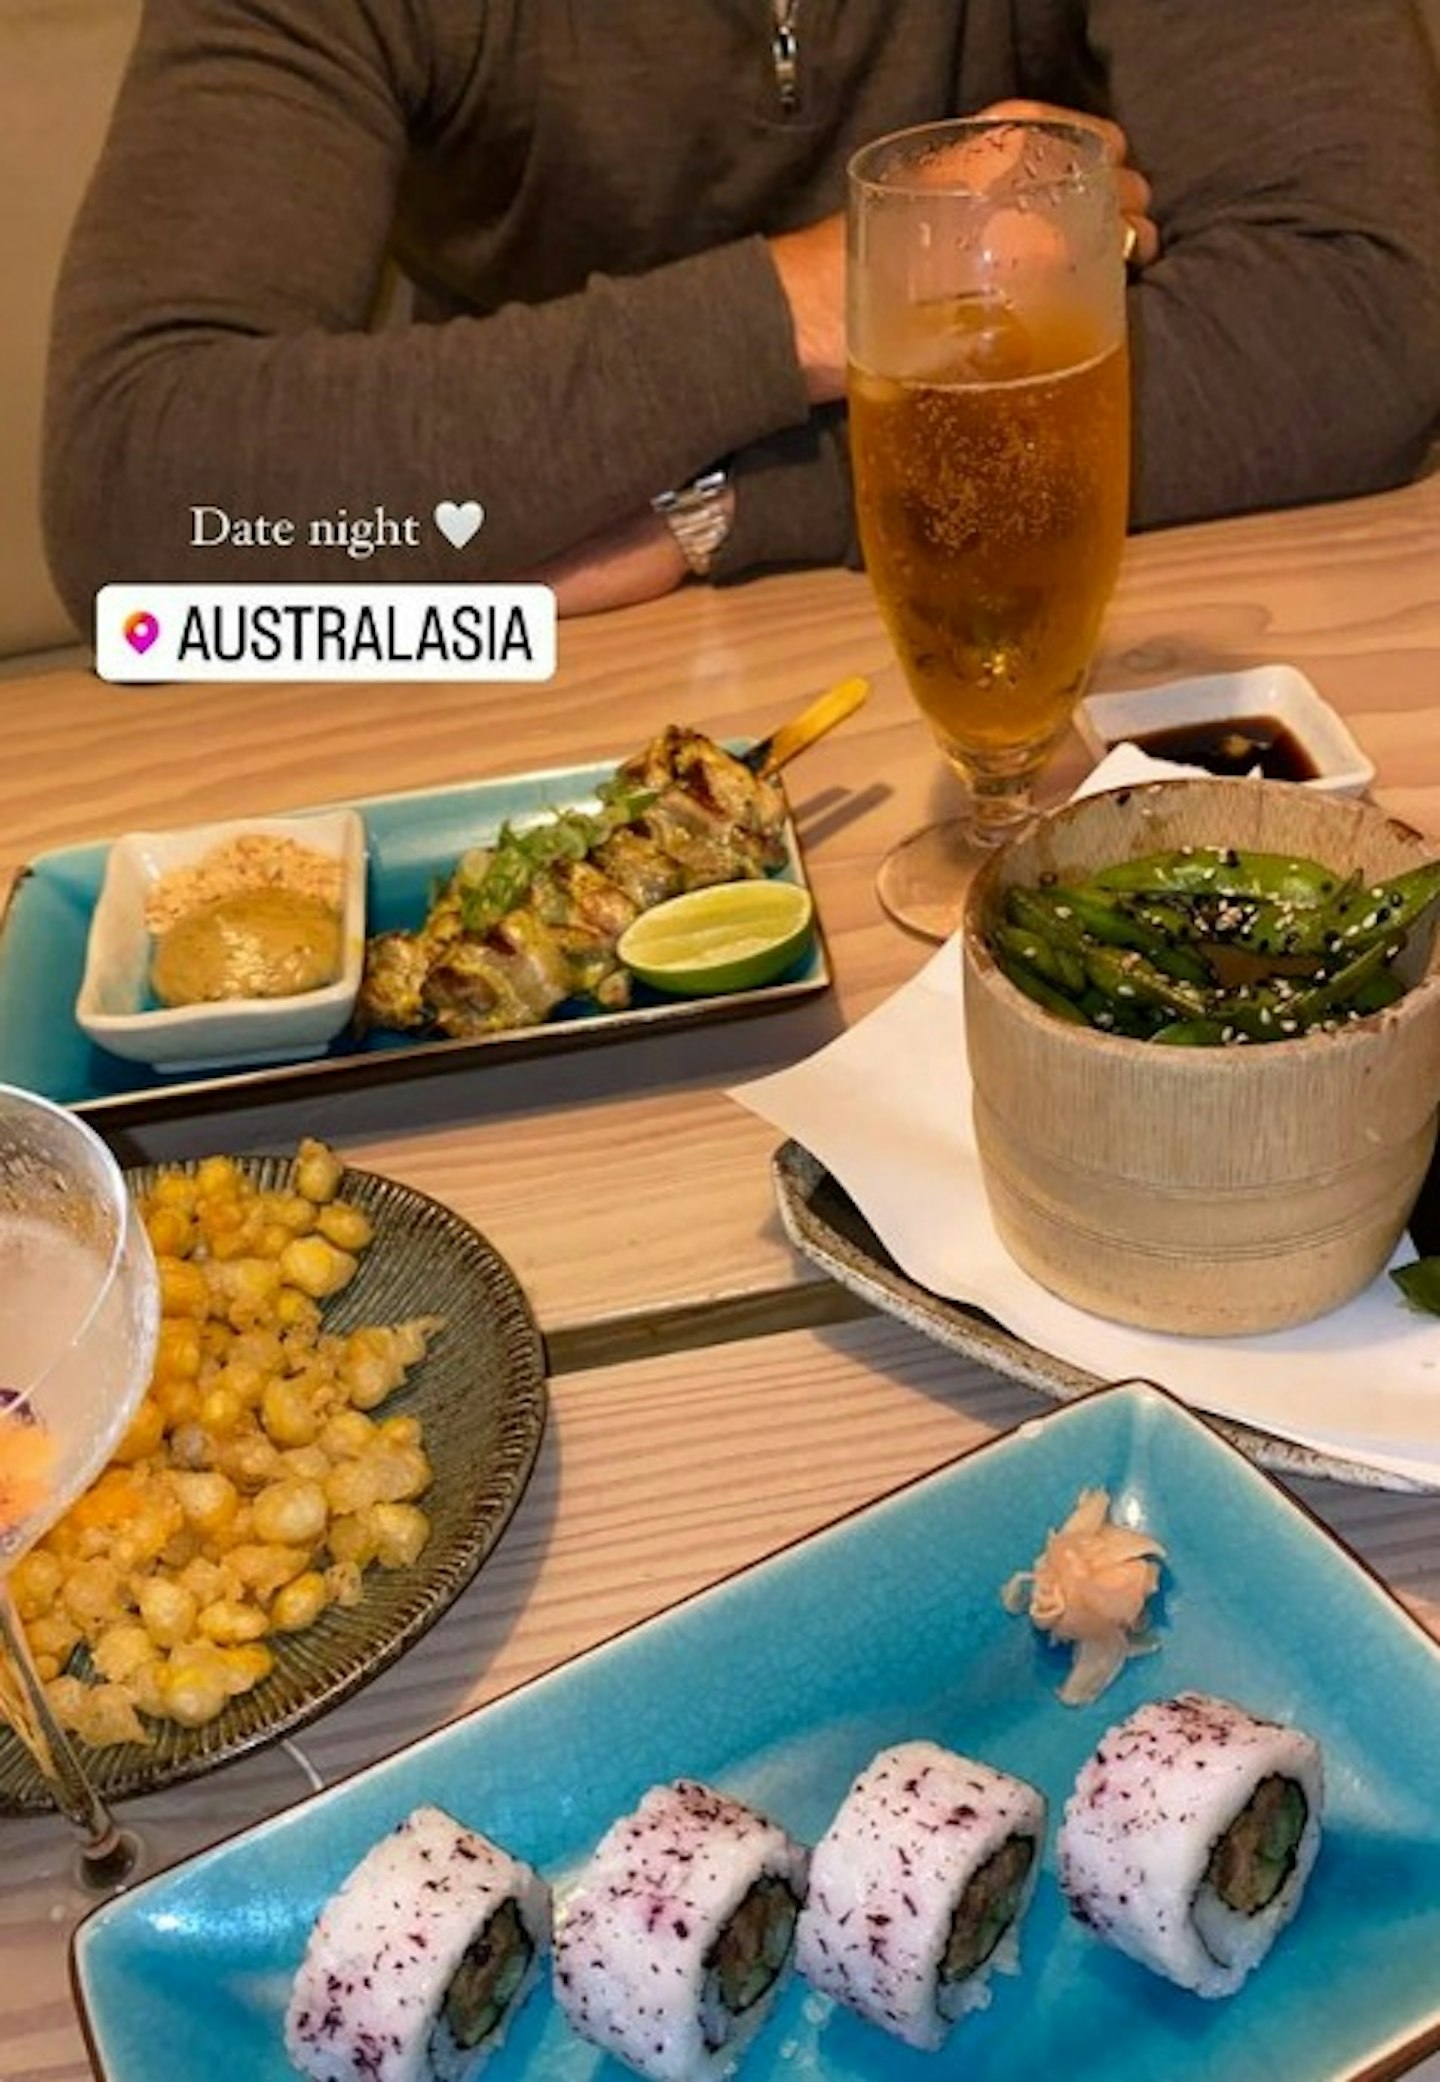 Claudia Fogarty's Instagram story of a date night at Australasia restaurant in Manchester